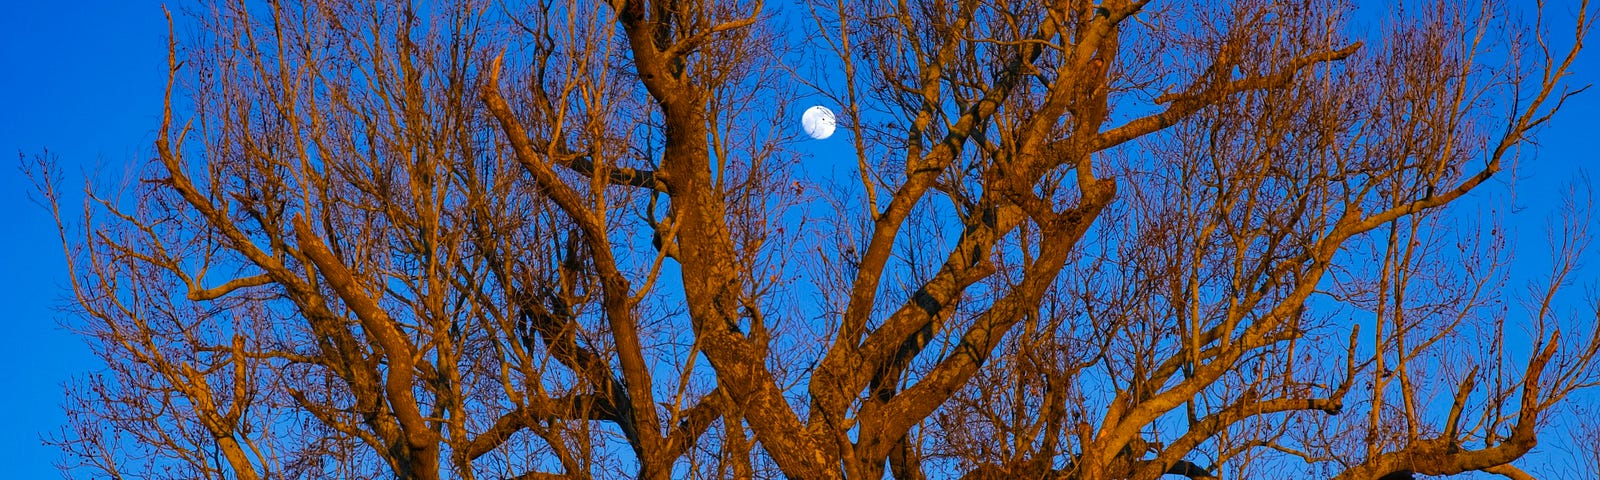 a bare tree against the sky with a full moon showing